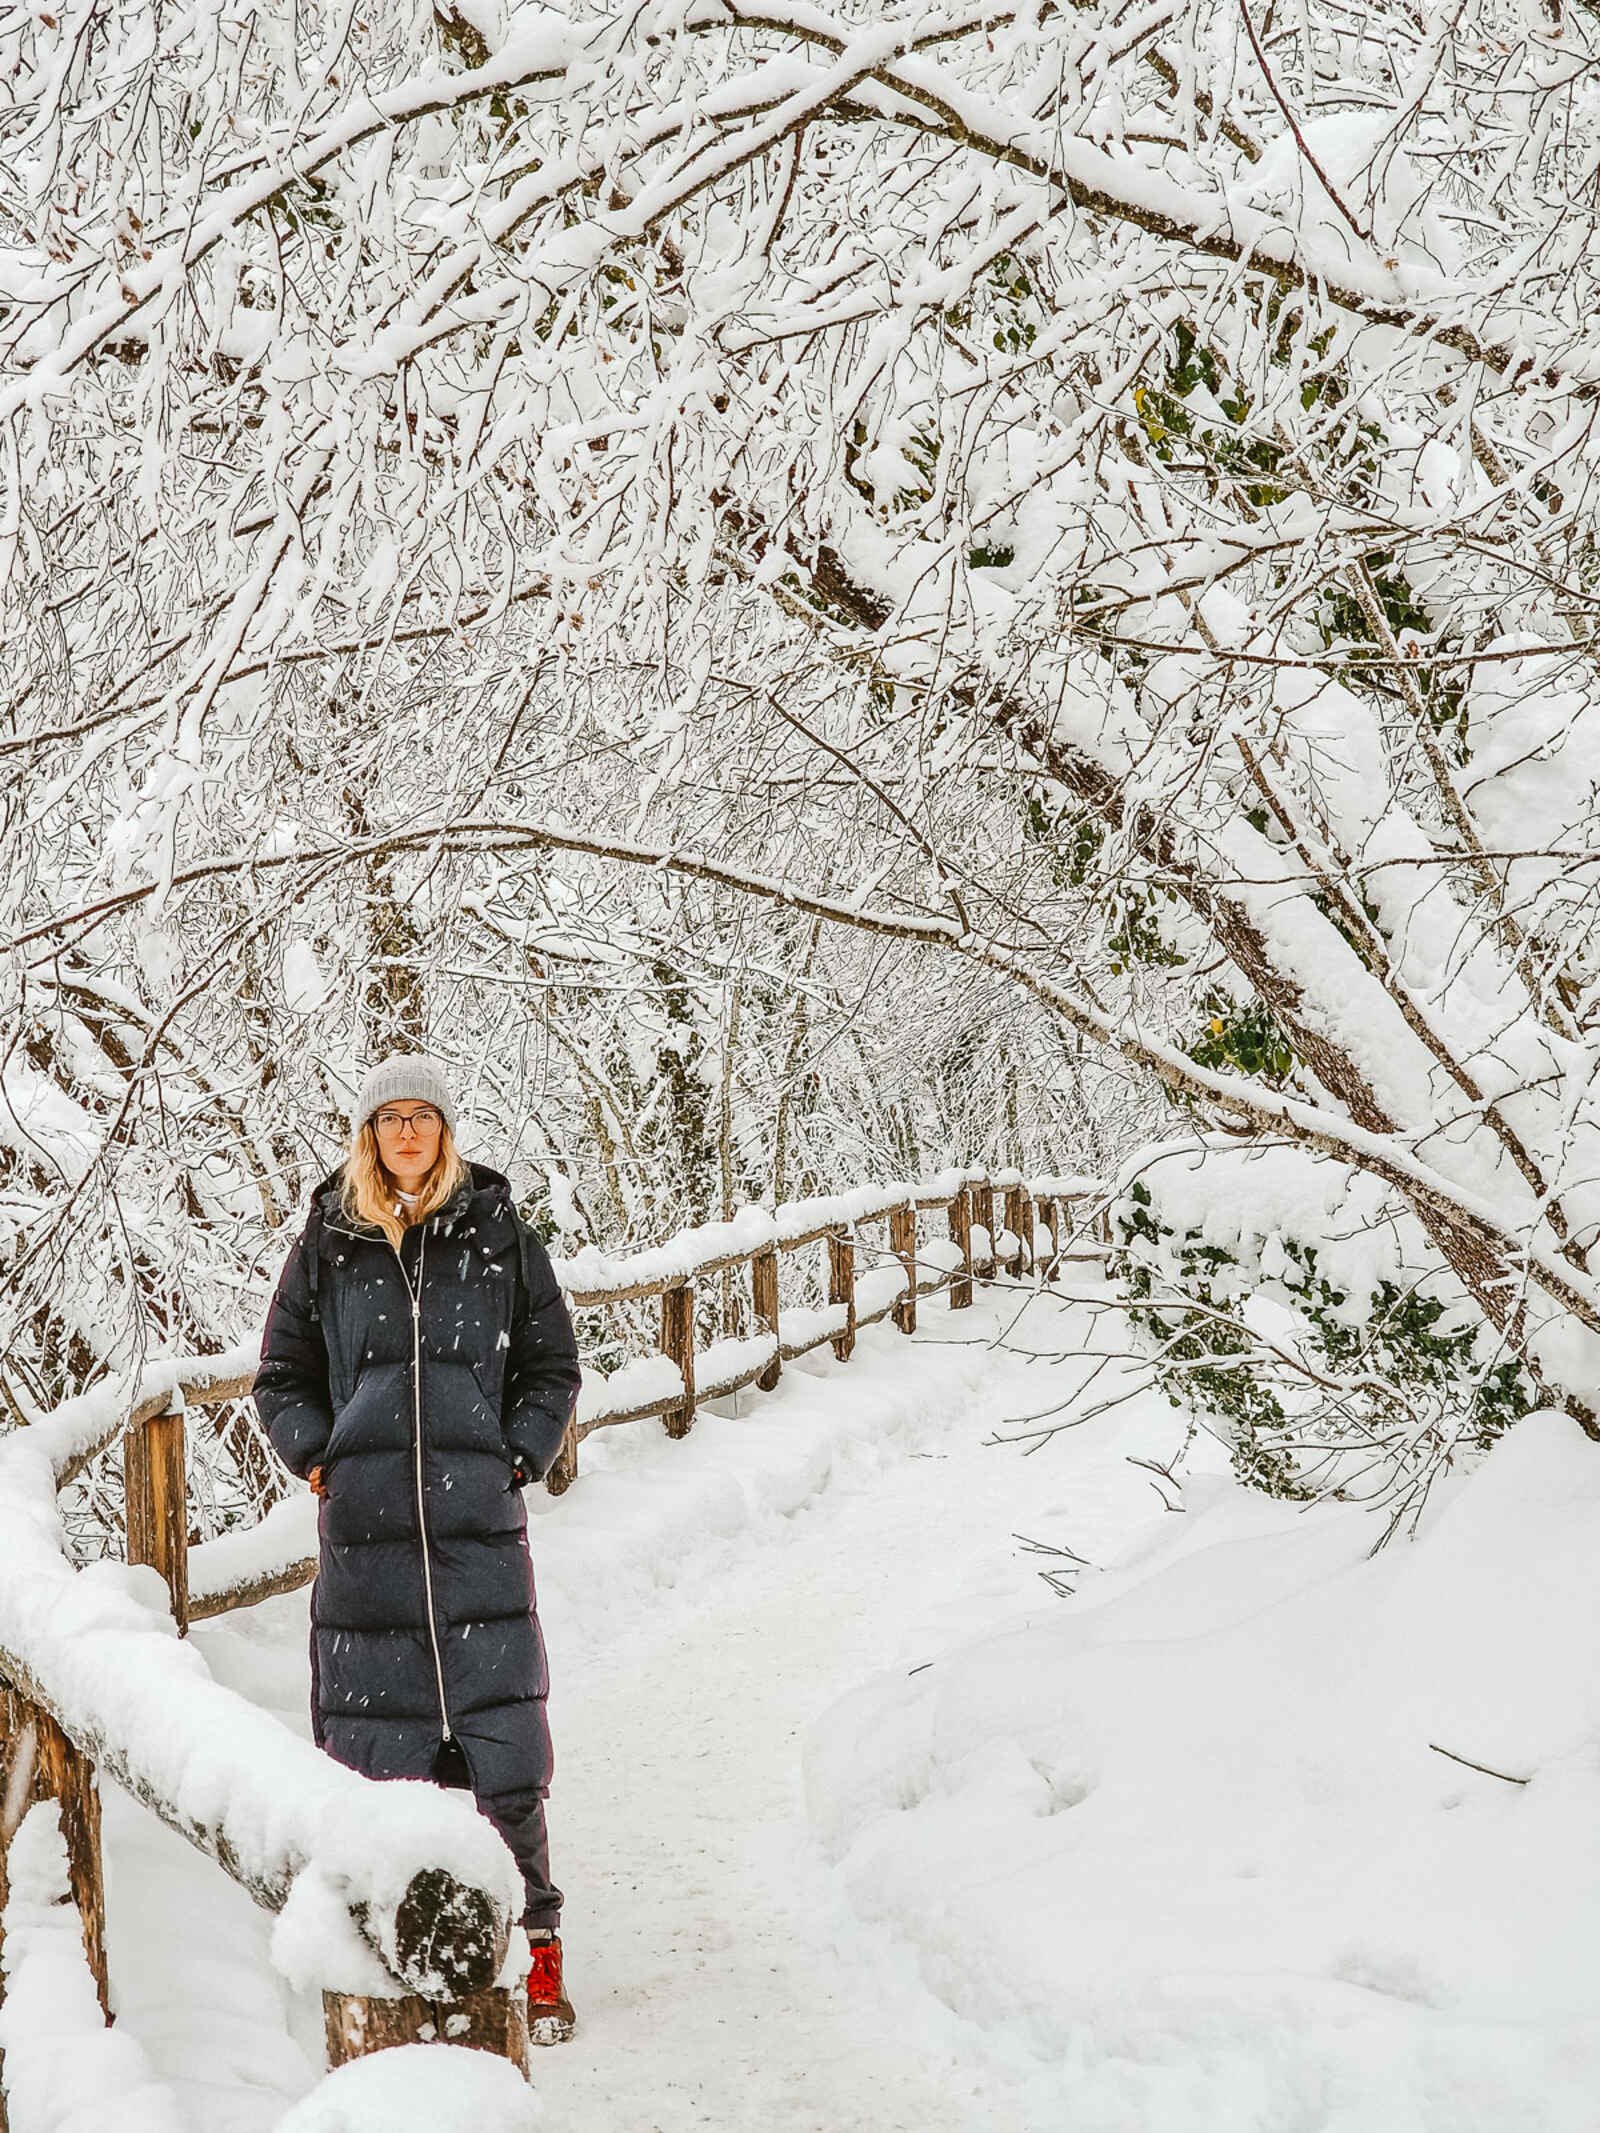 Girl in a long black puffy jacket standing on a snow covered path with snowy treeds and a snow covered fence next to the girl, snow in Plitvice Croatia